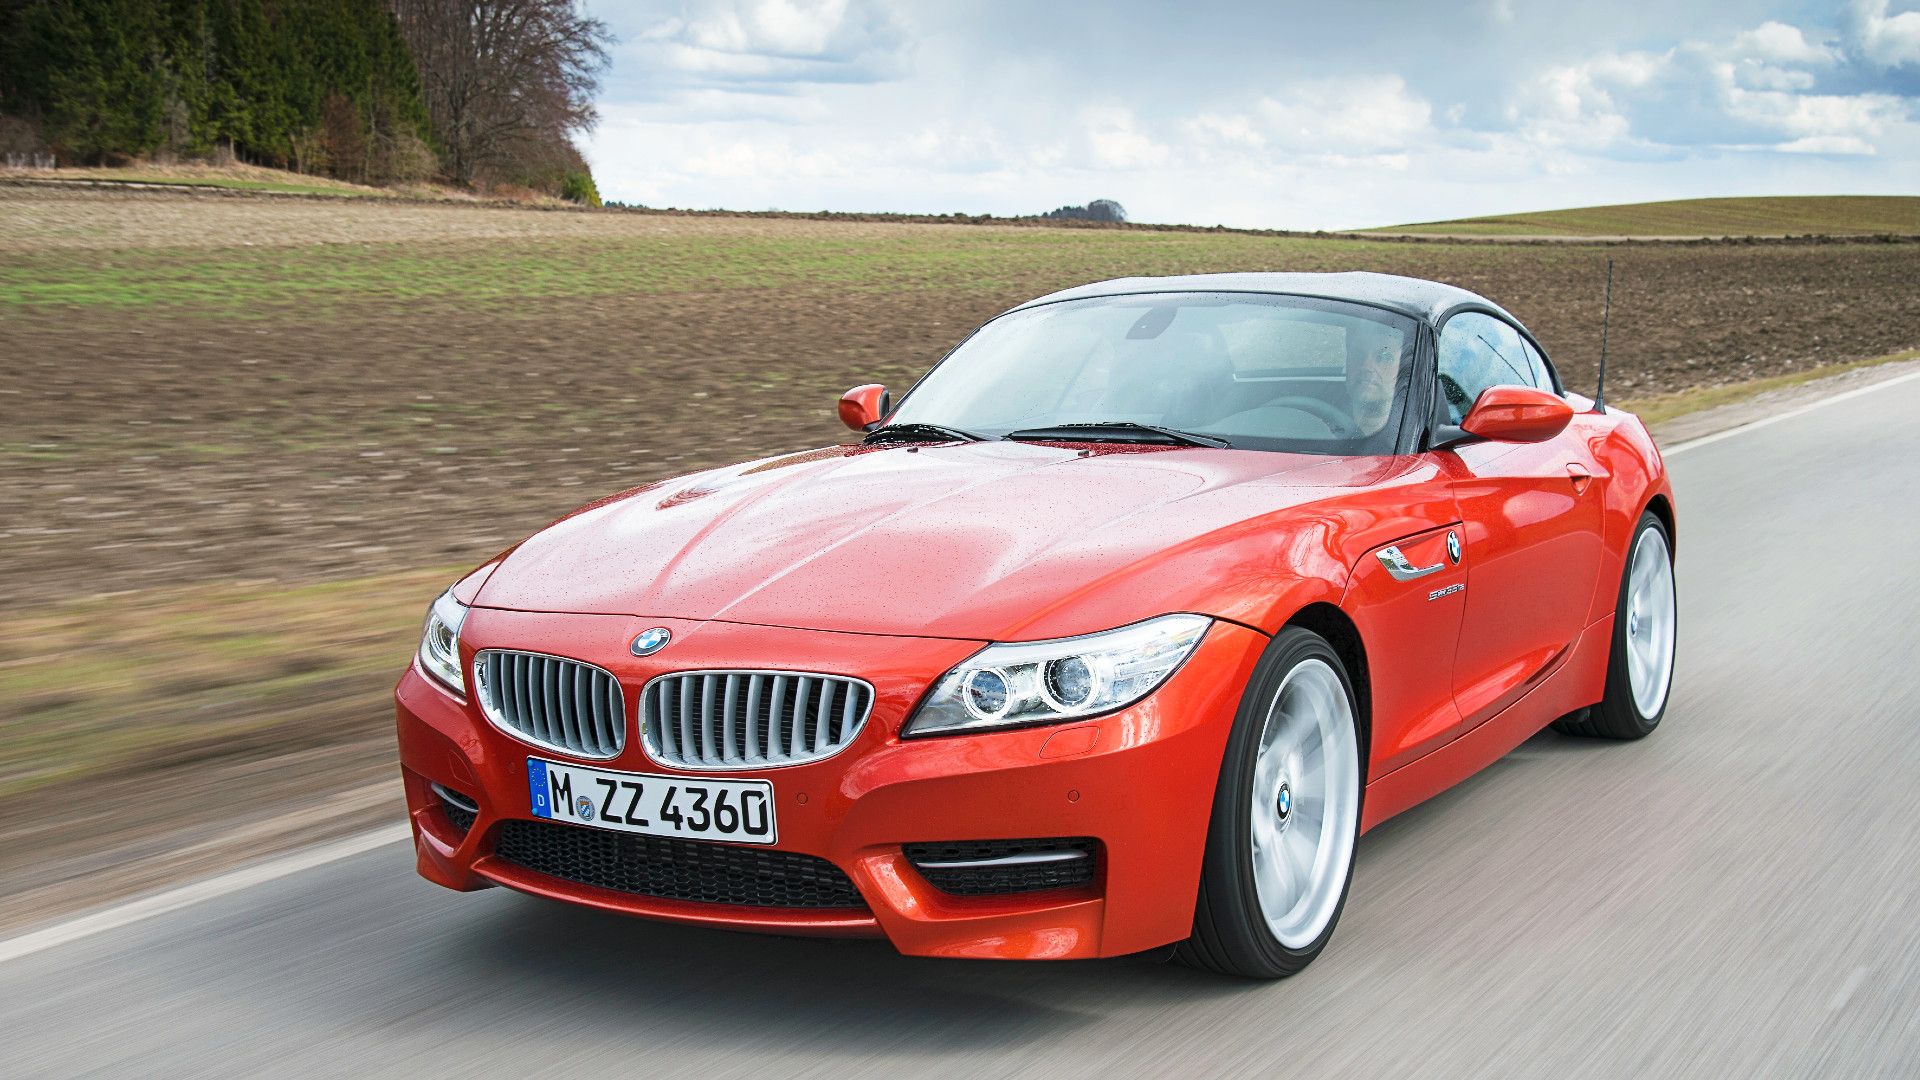 2014 BMW Z4 sDrive35i Roadster cruising on the road